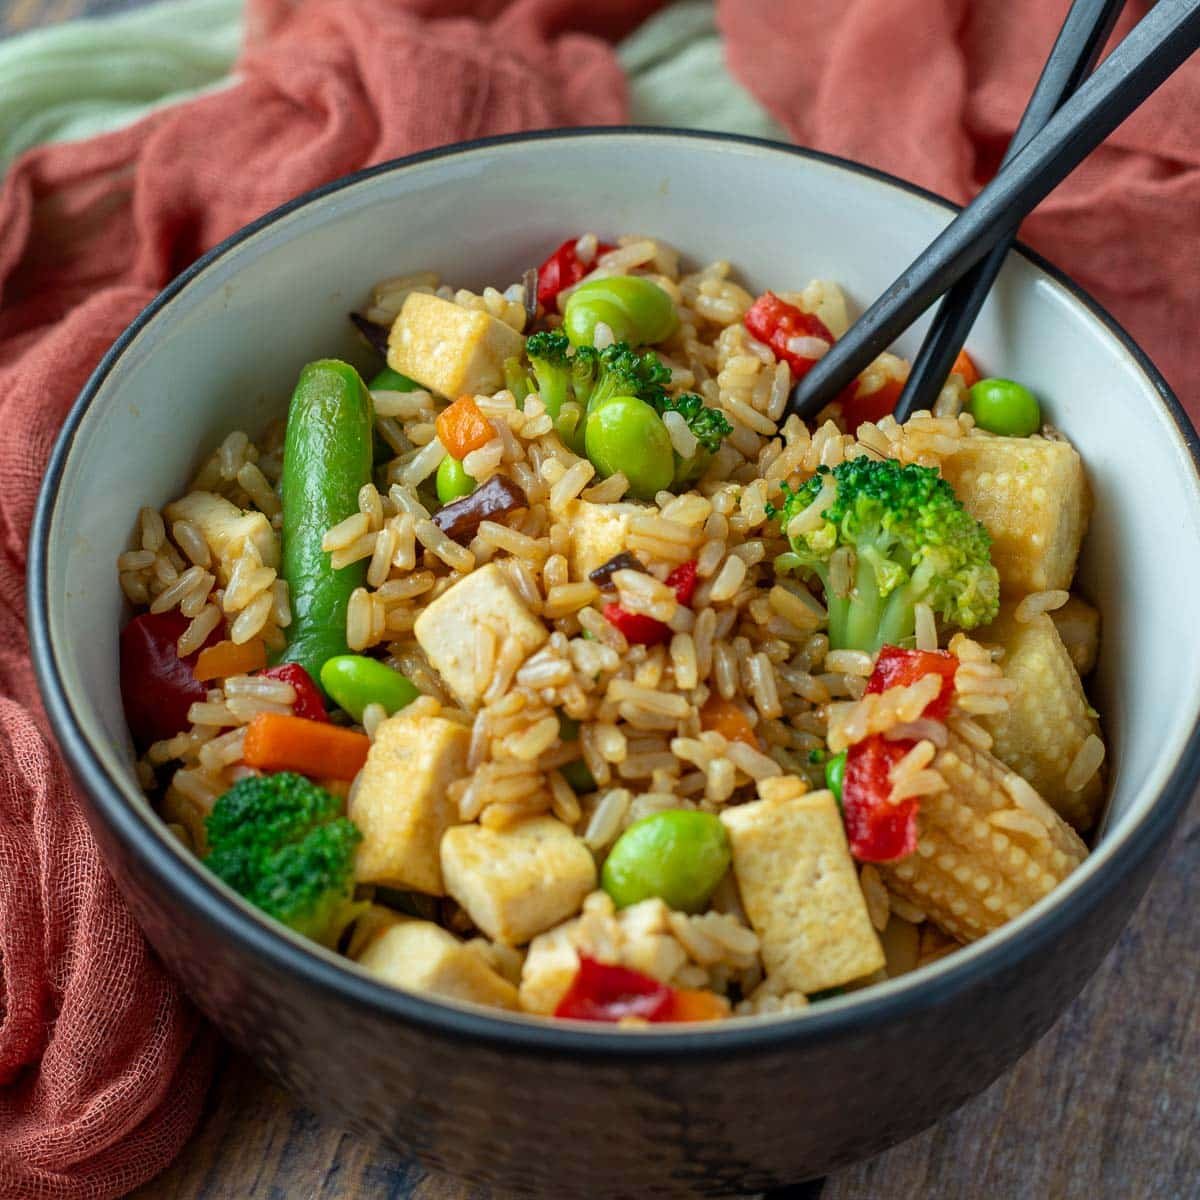 Bowl of fried rice with tofu and mixed vegetables.